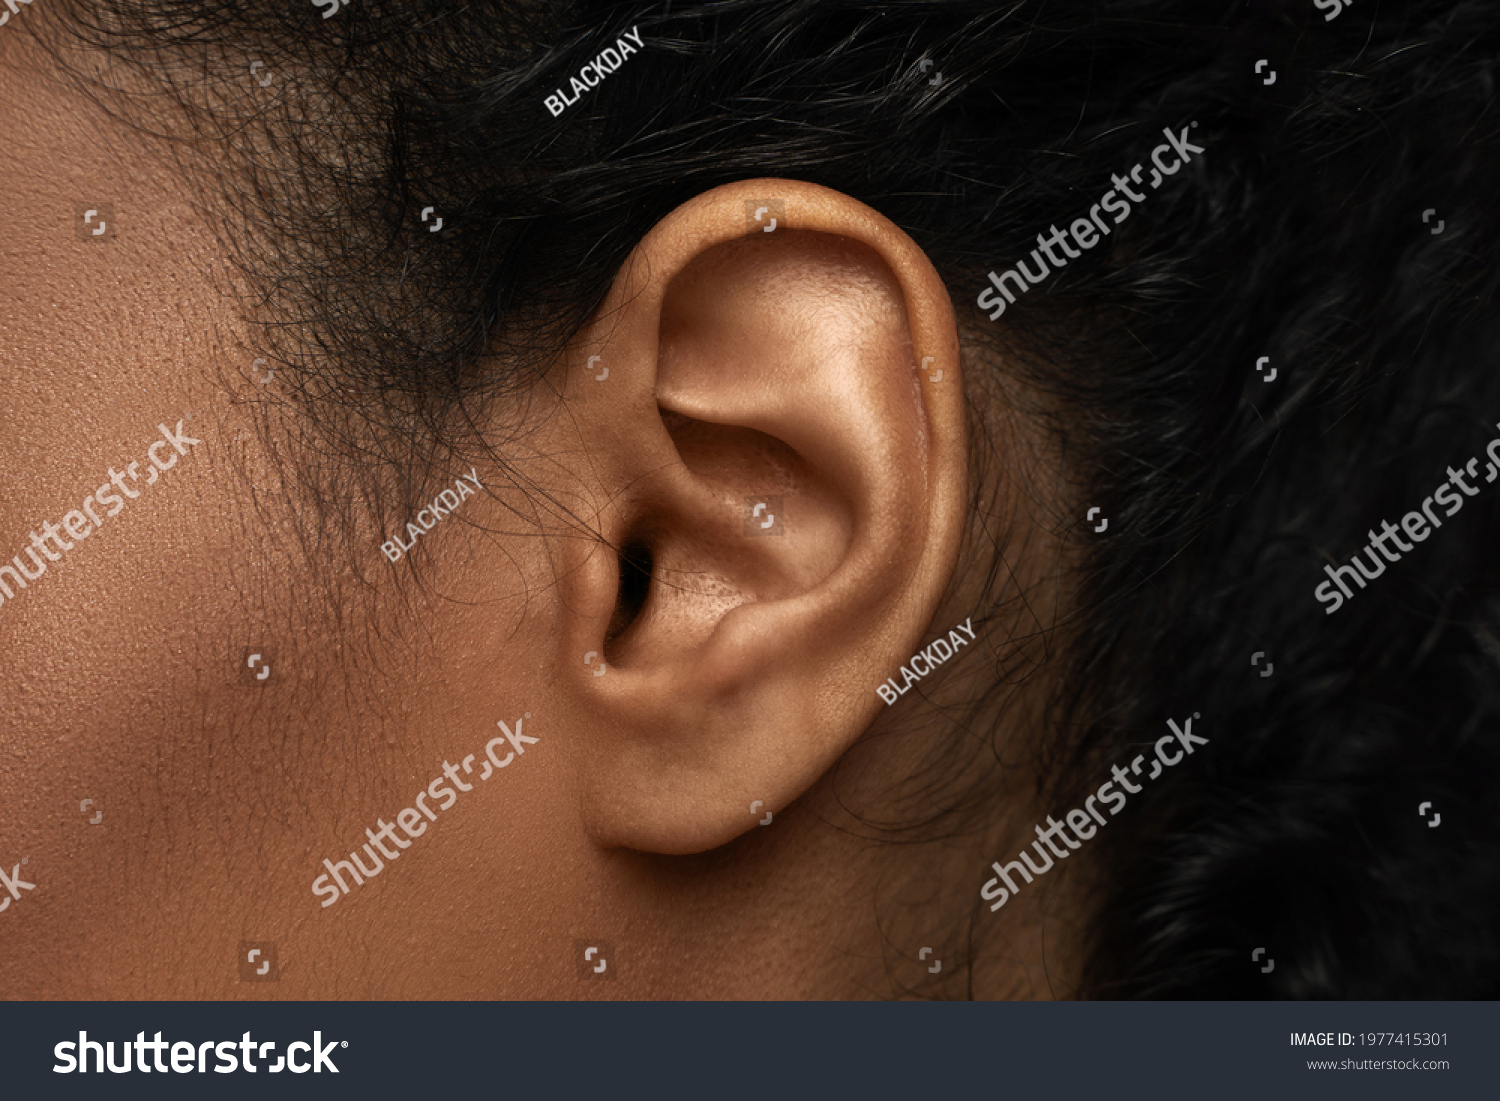 Body parts in details - Closeup view of black female ear #1977415301